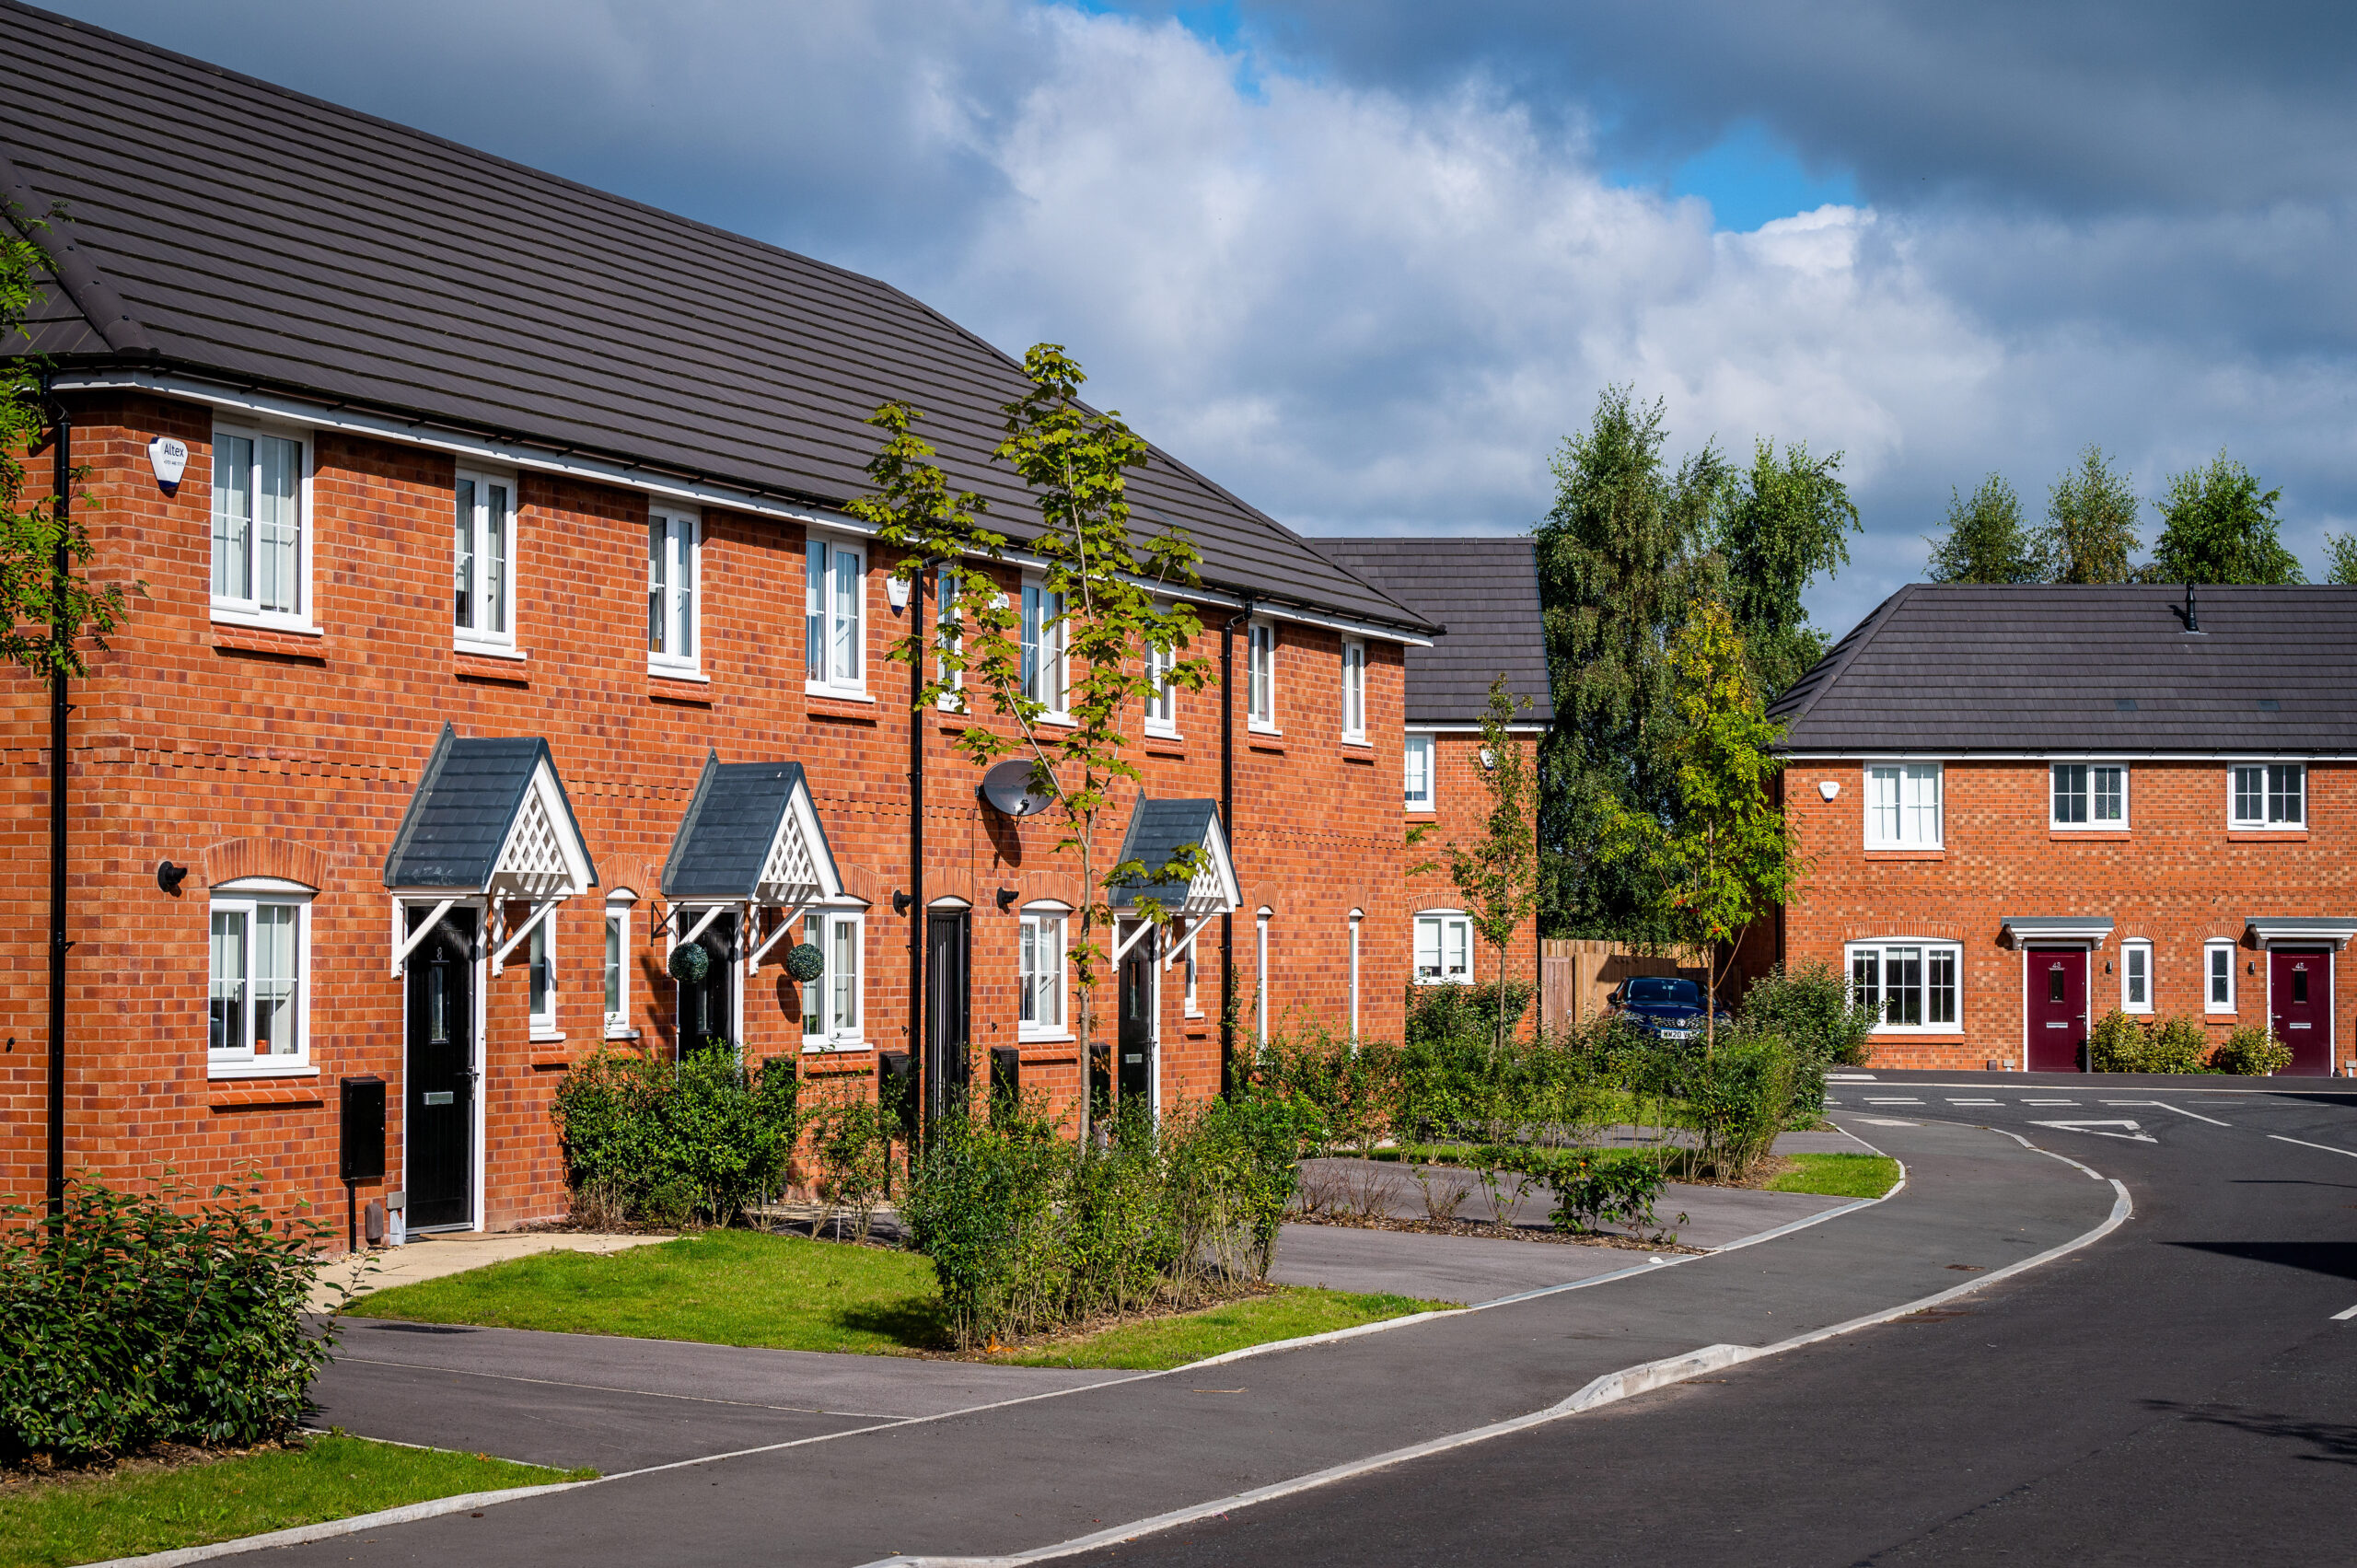 New Homes, Renting, Abbotsfield, St Helens